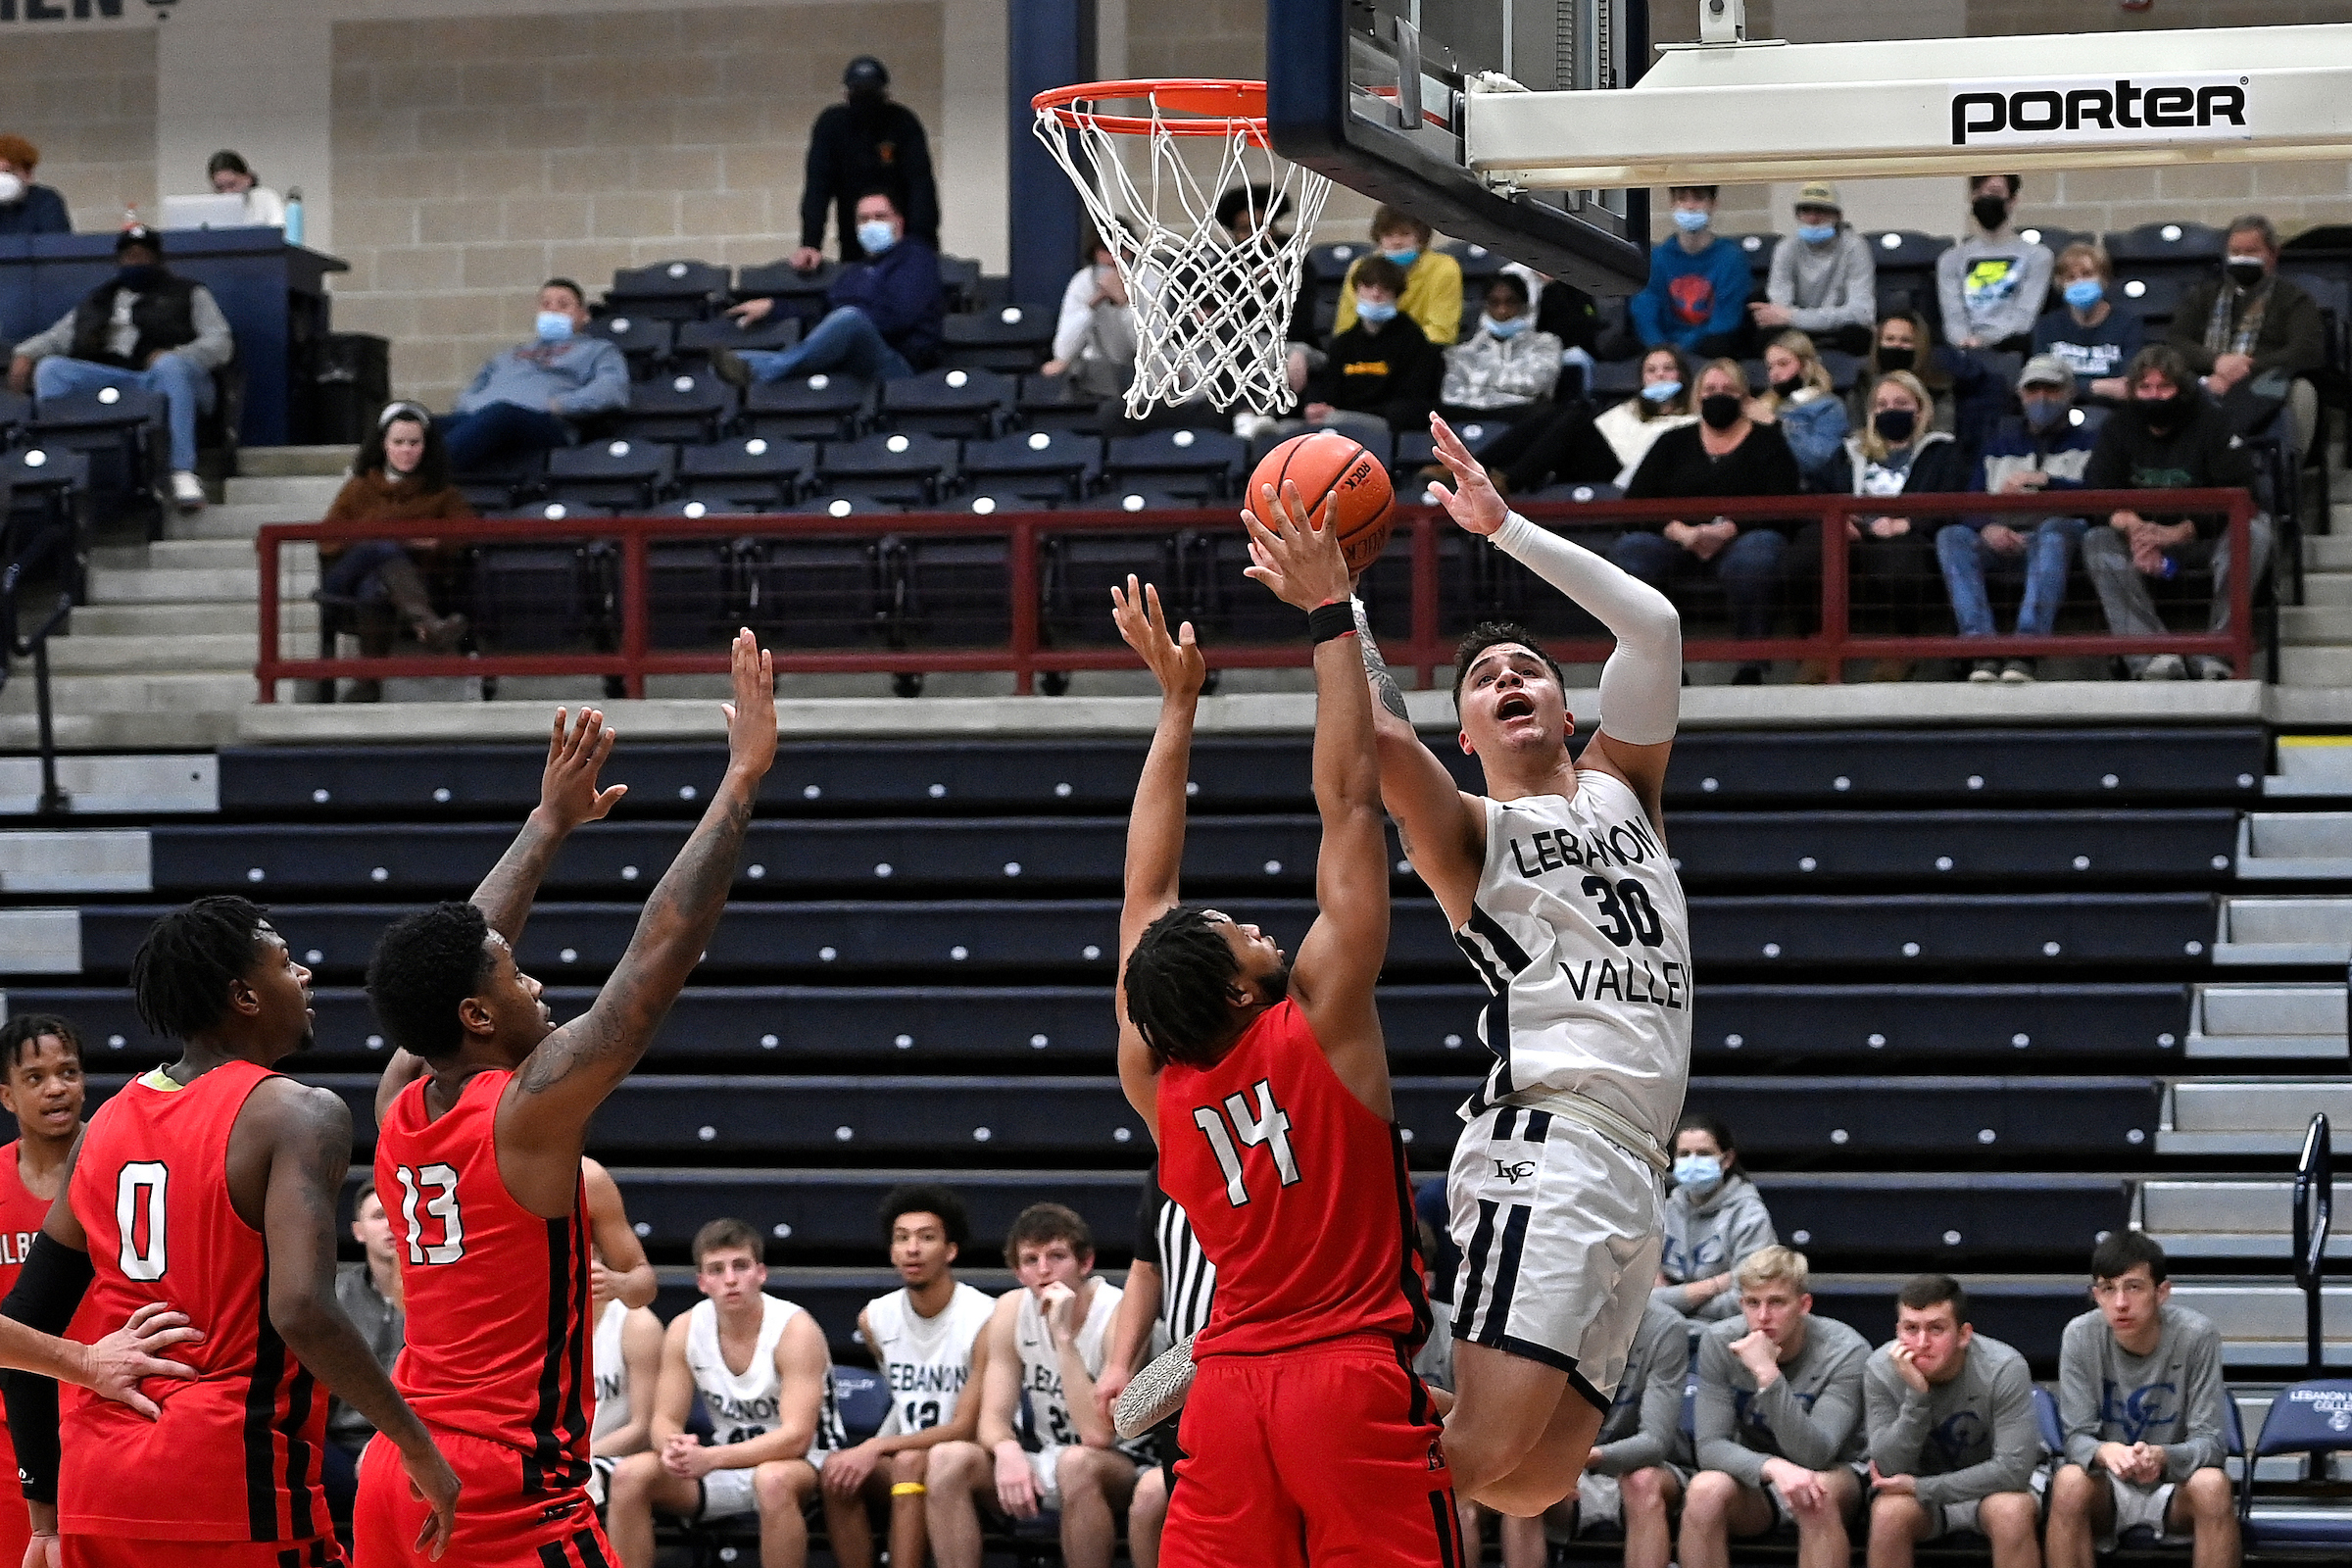 Collin Jones goes for a contested layup for LVC Men's Basketball